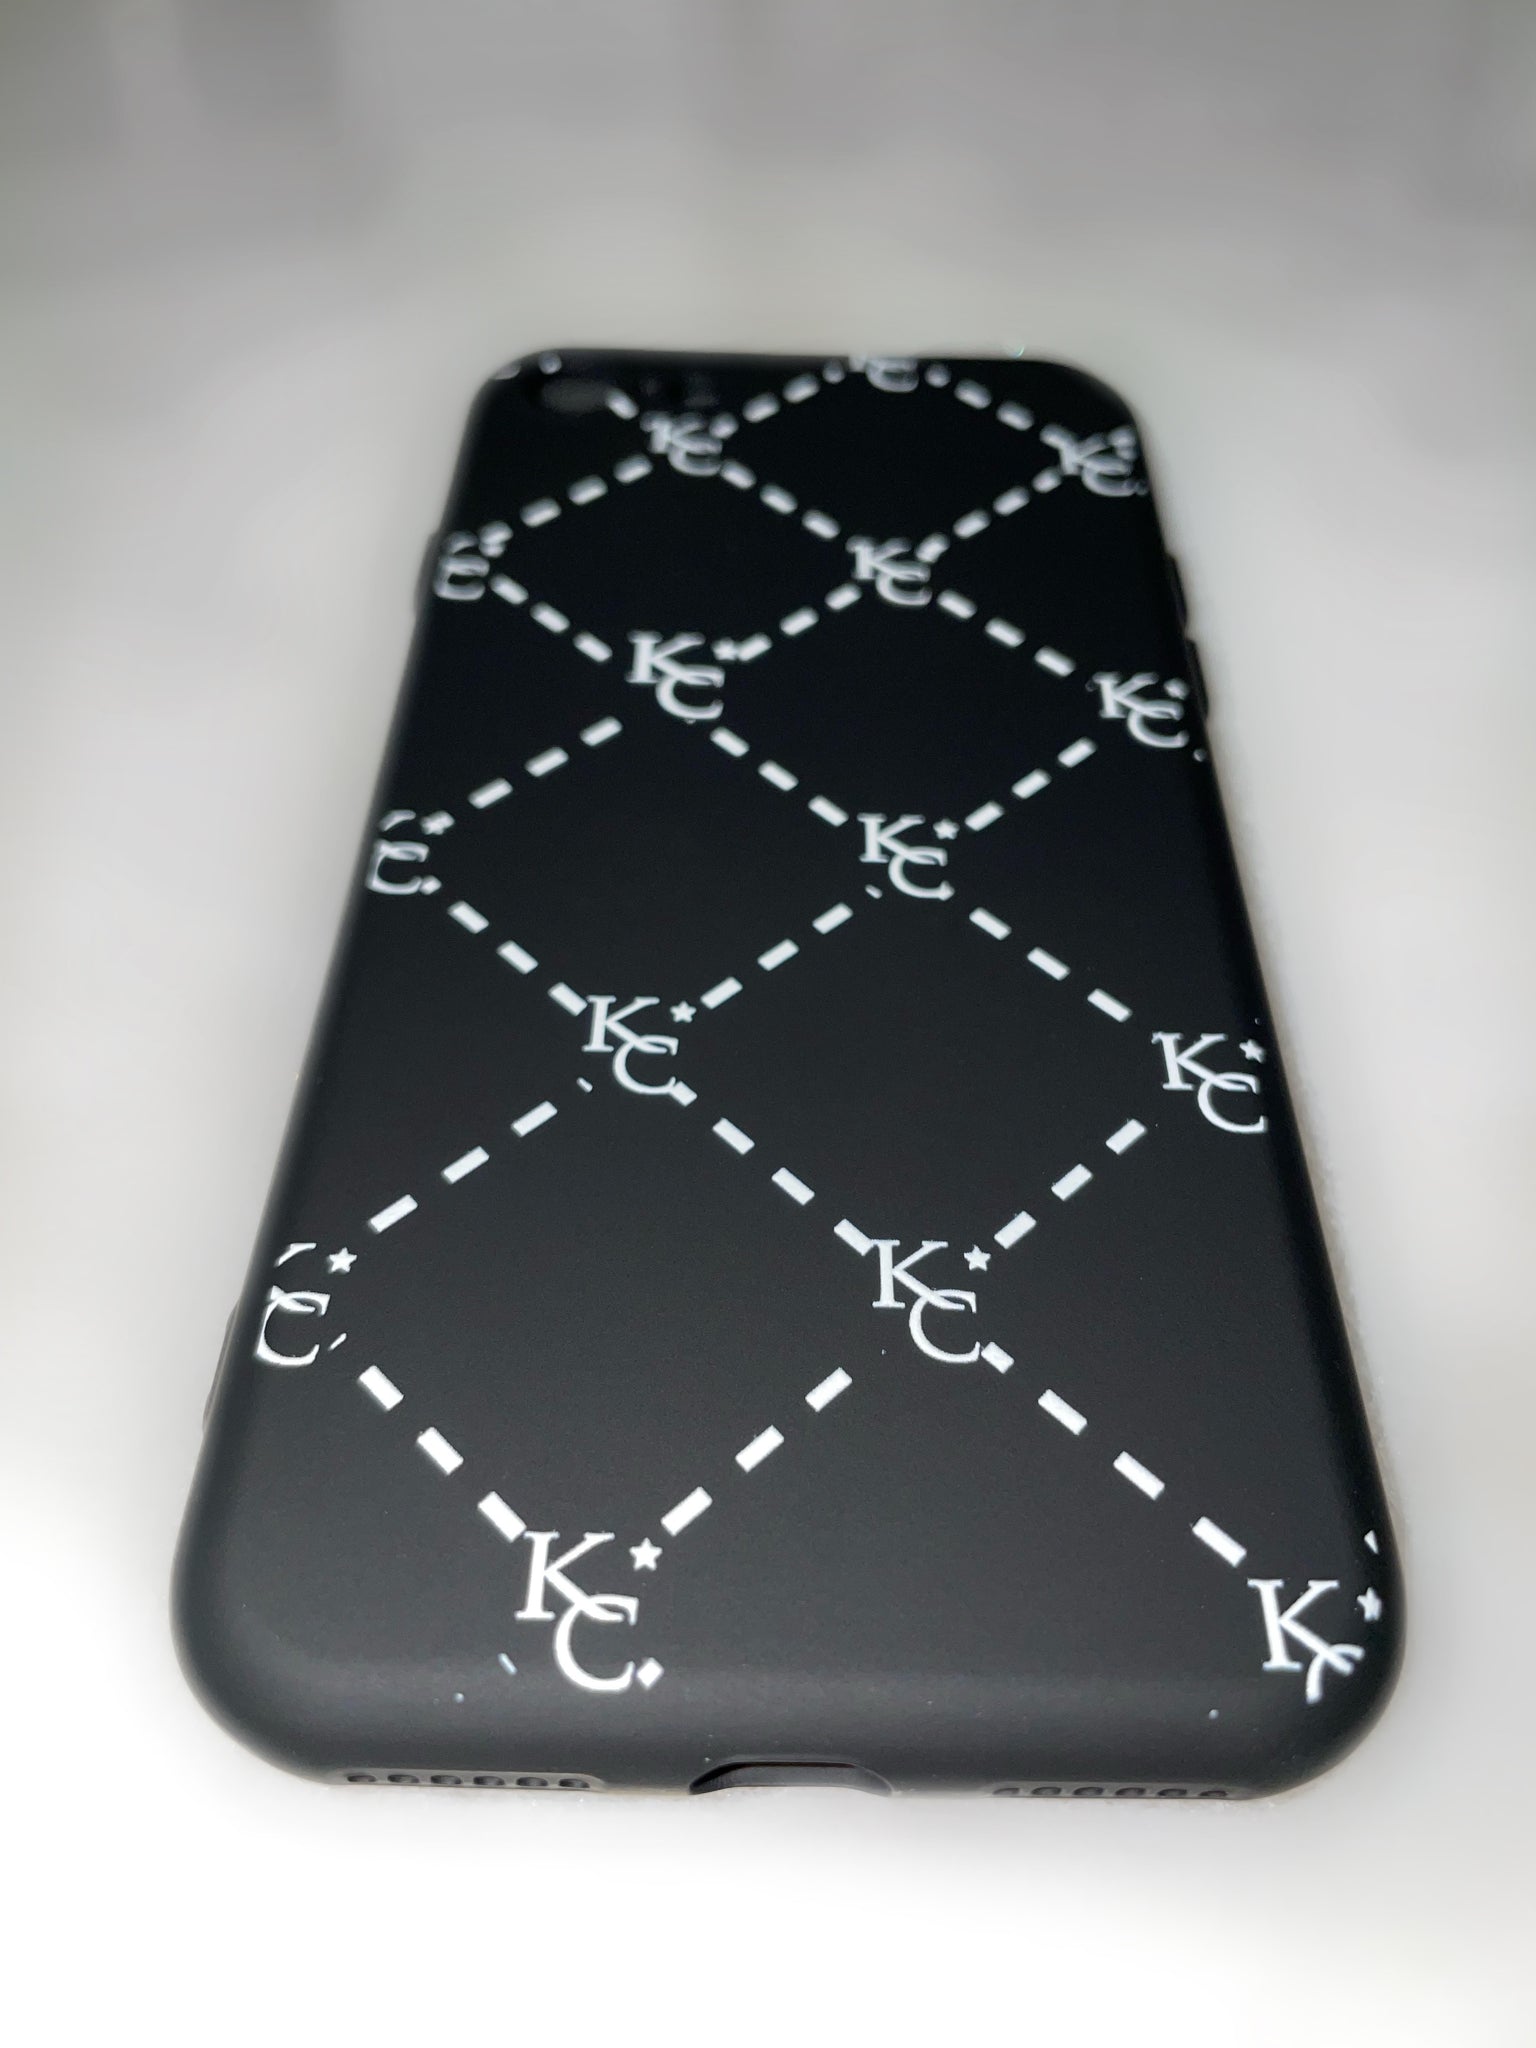 Linked In Phone case